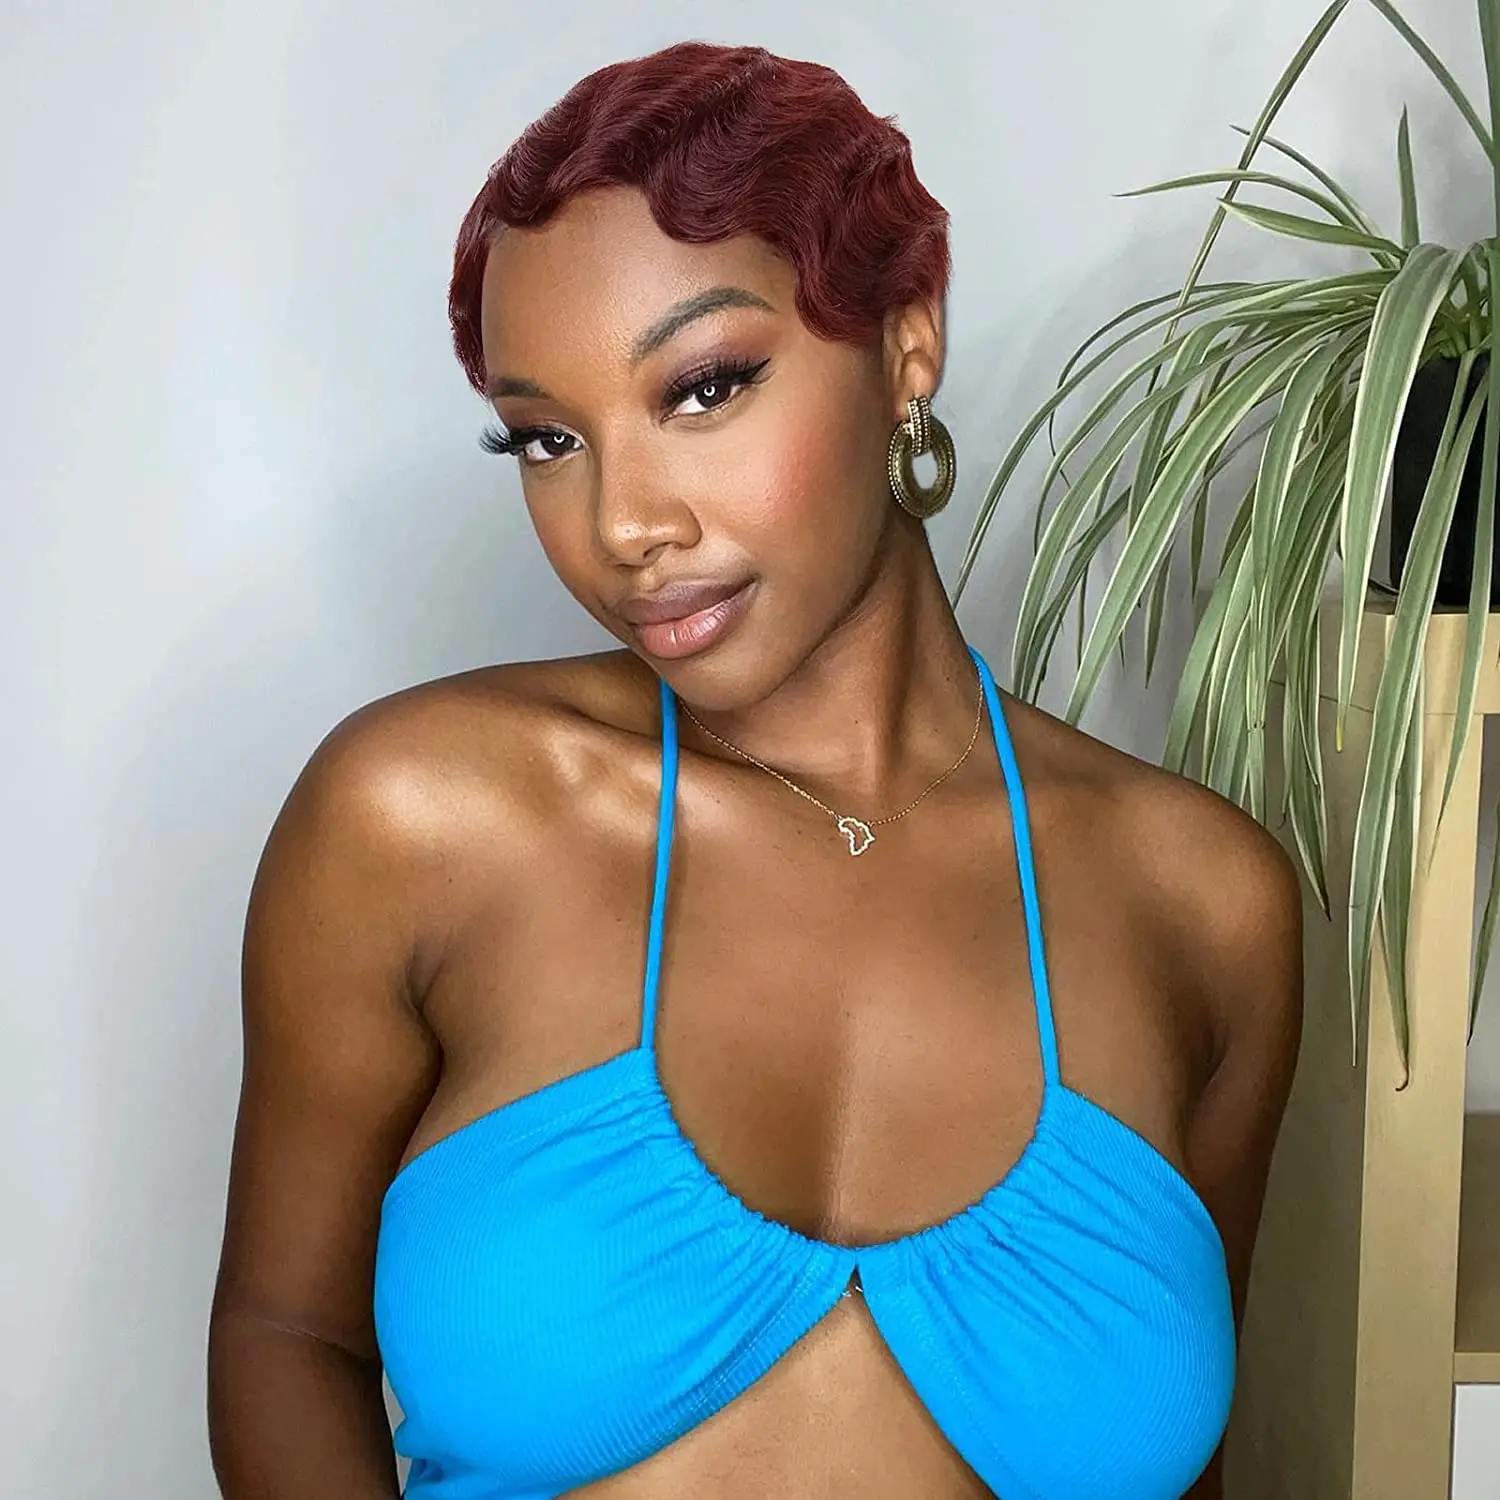 Short Curly Human Hair Finger Wave Wigs Short Brazilian Remy Retro Pixie Cut Wigs Ocean Wave Wig For Black Women Short Hairstyle